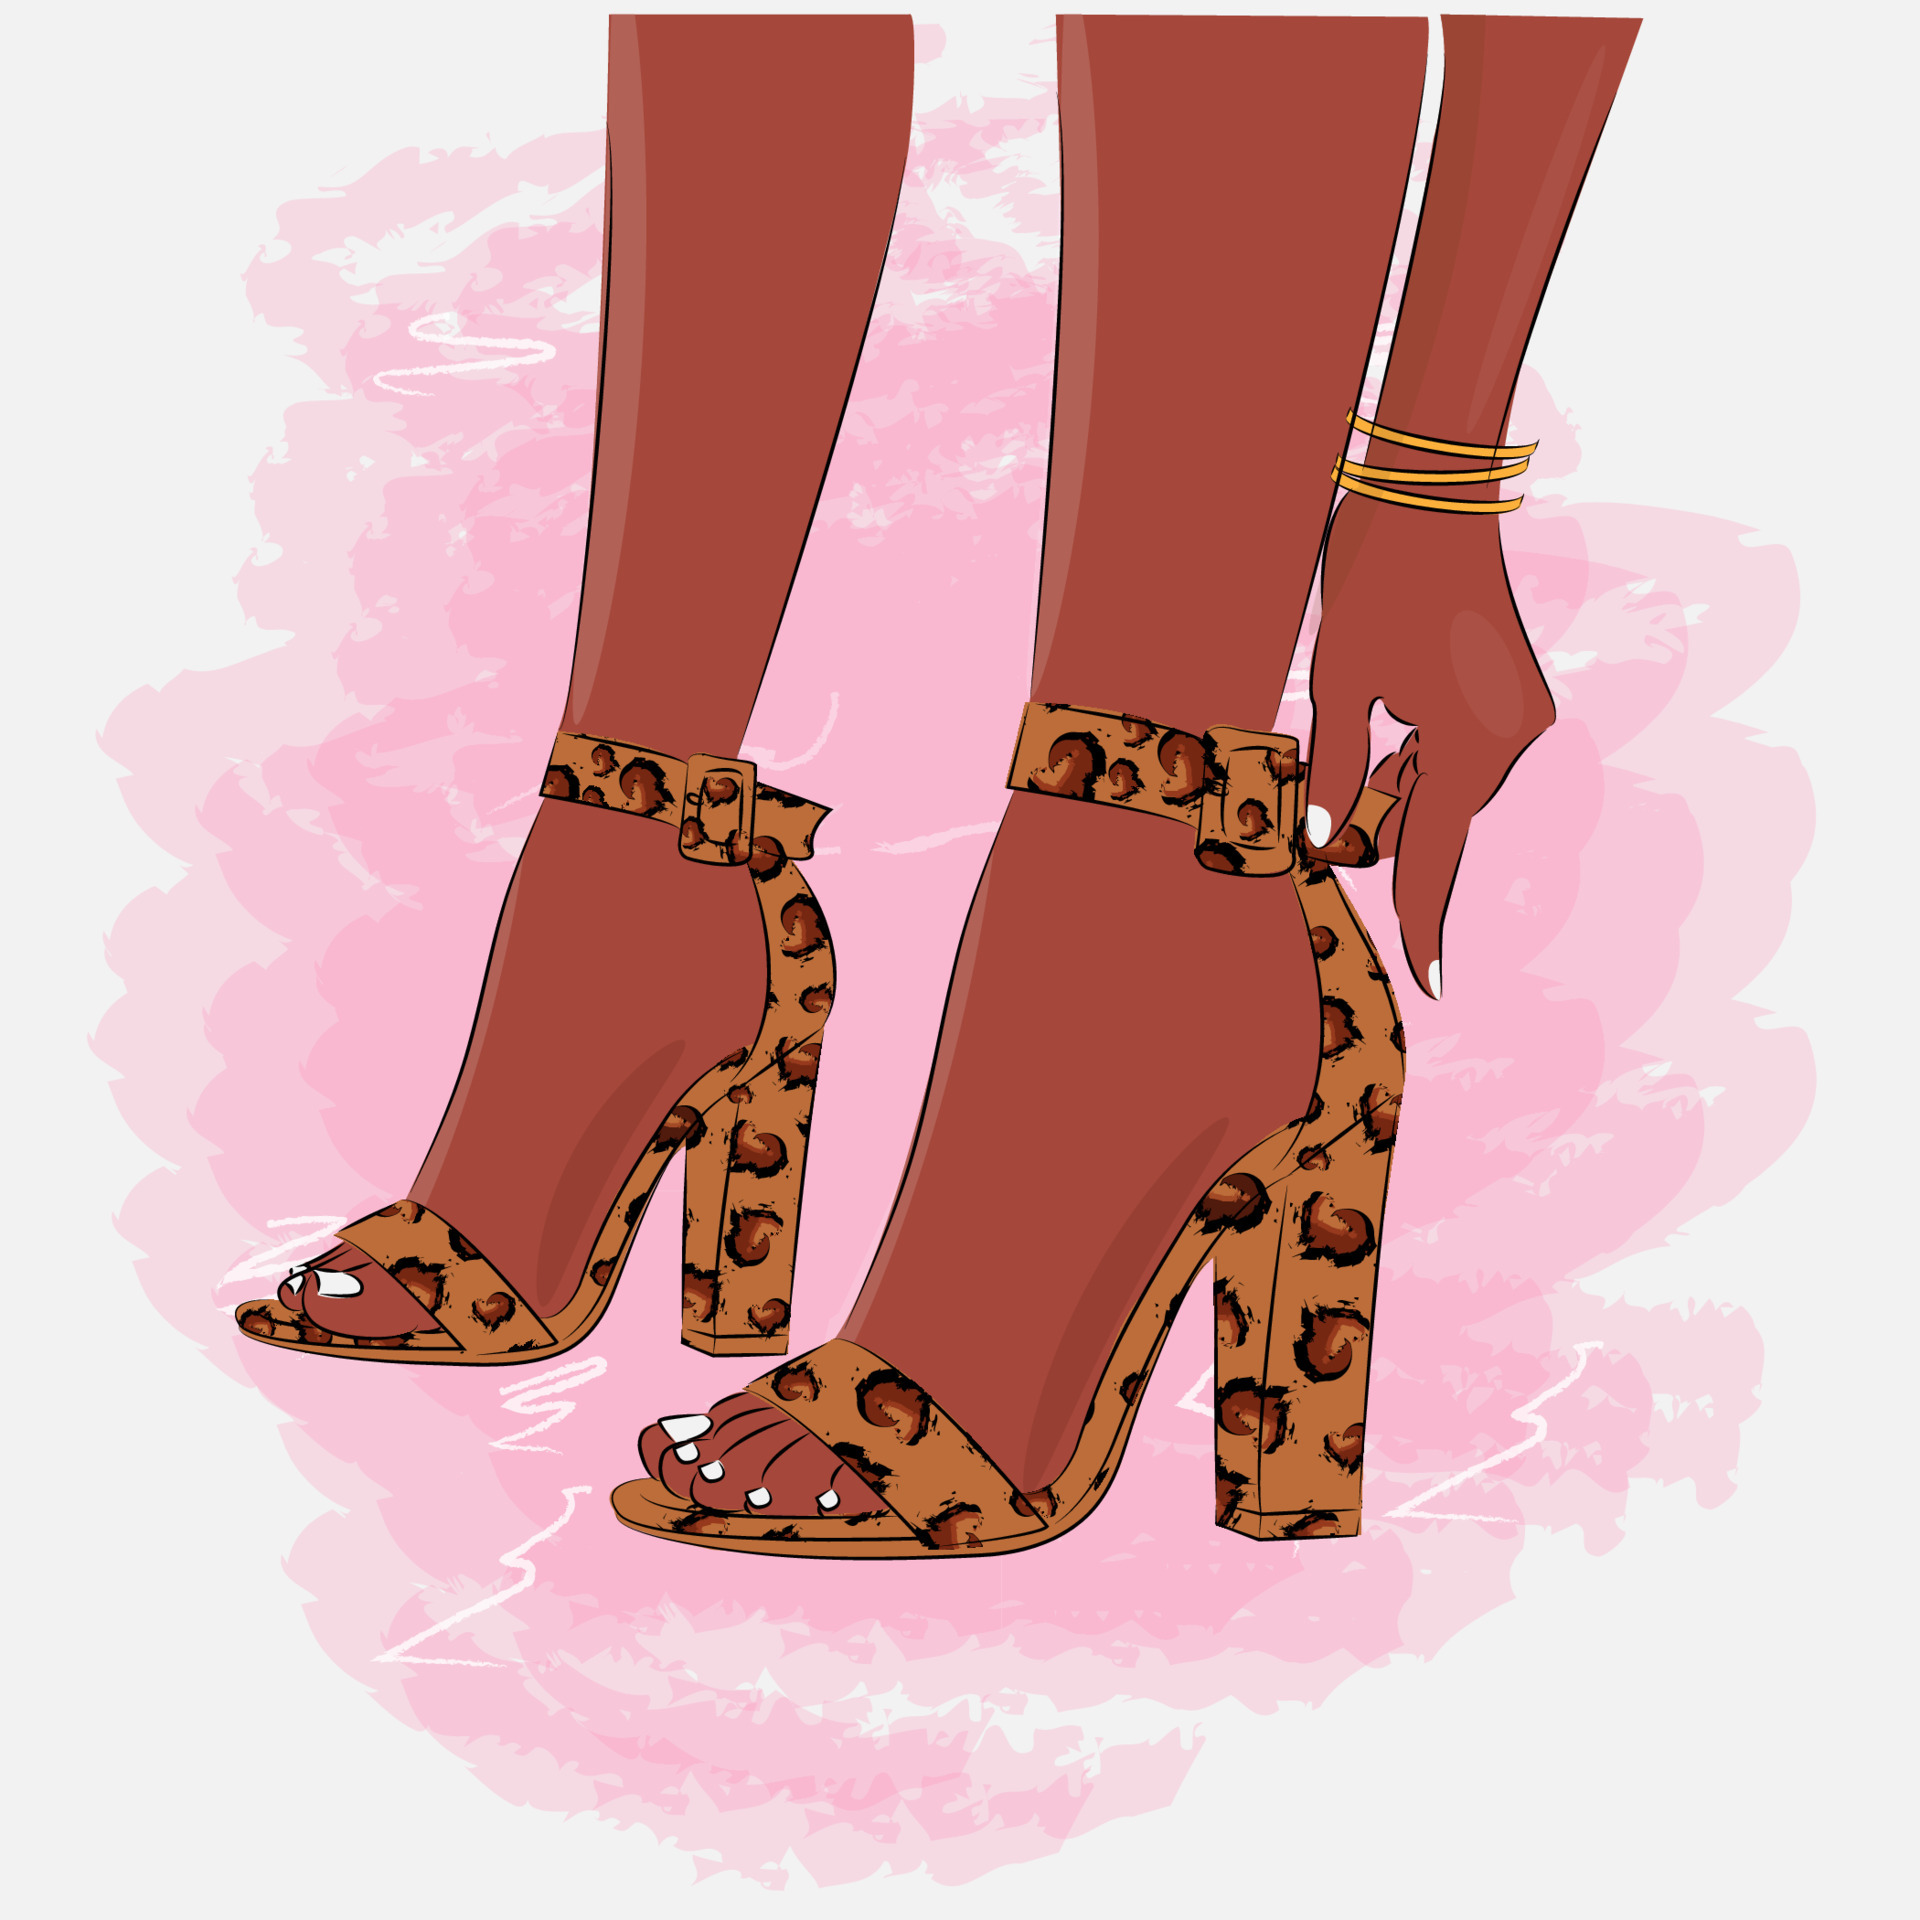 Pin on Shoe sketches